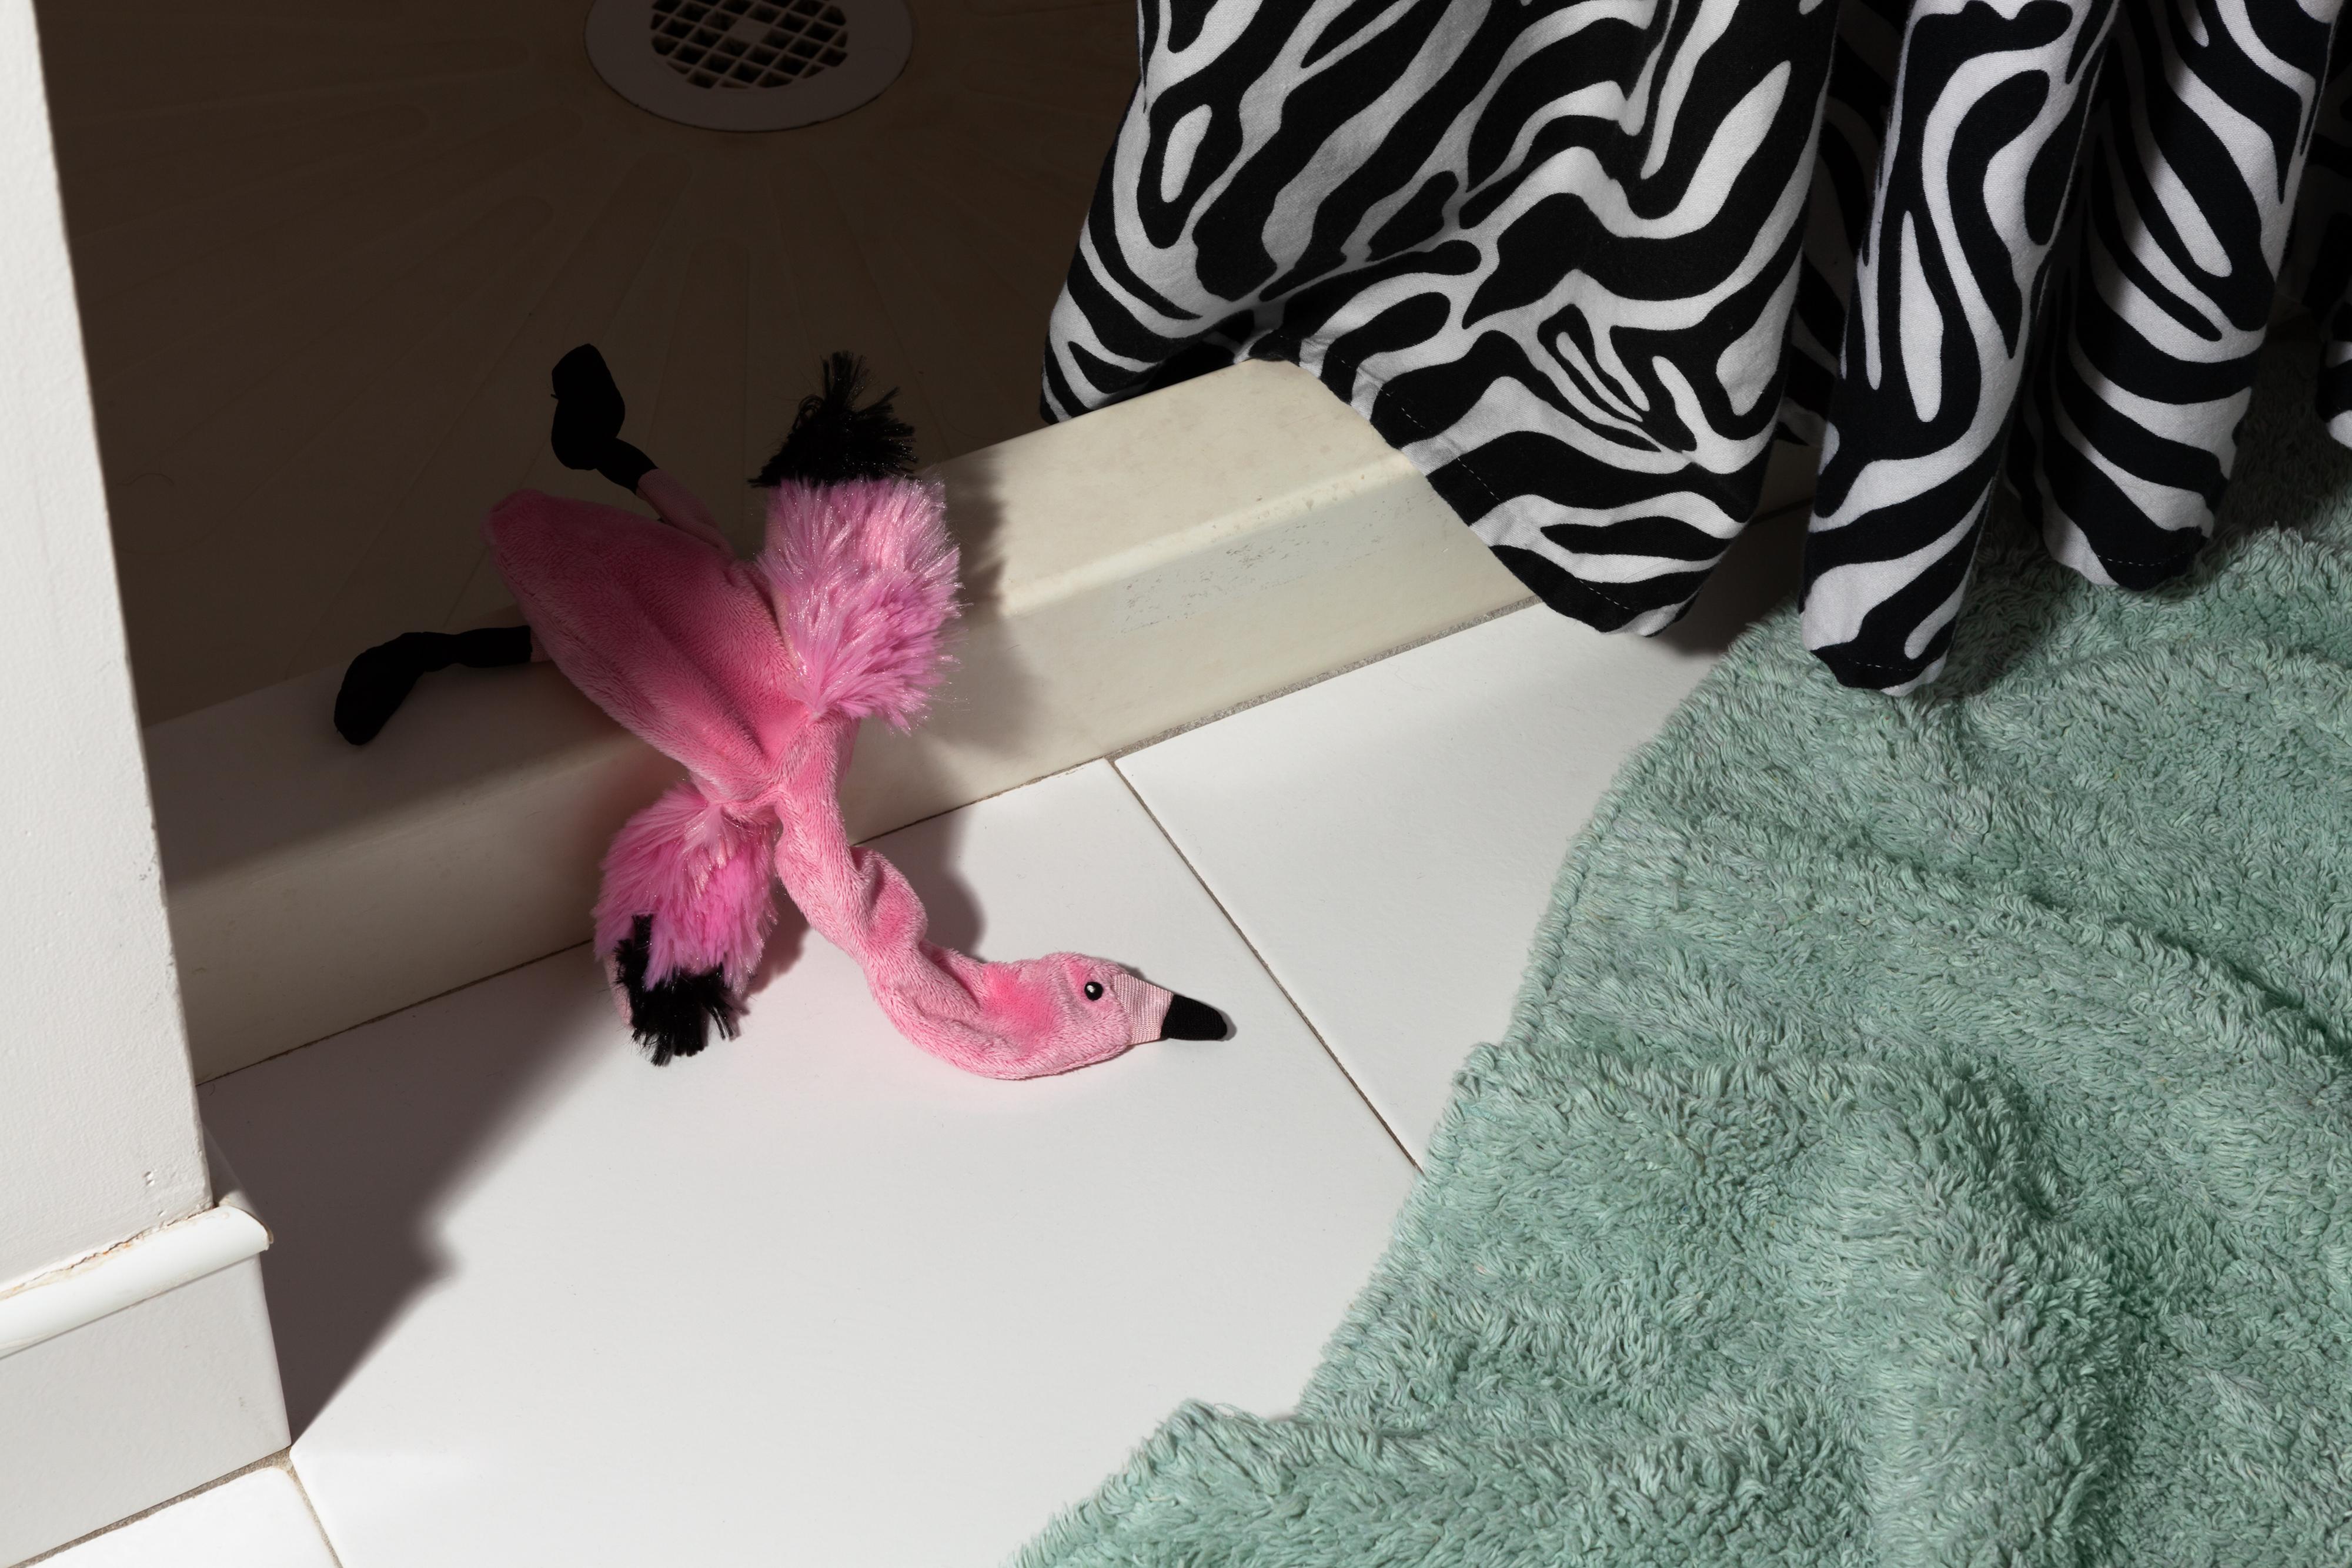 Jeanette May Color Photograph - “Morbidity & Mortality: Flamingo” Humorous Photograph of Dog Toy in Crime Scene